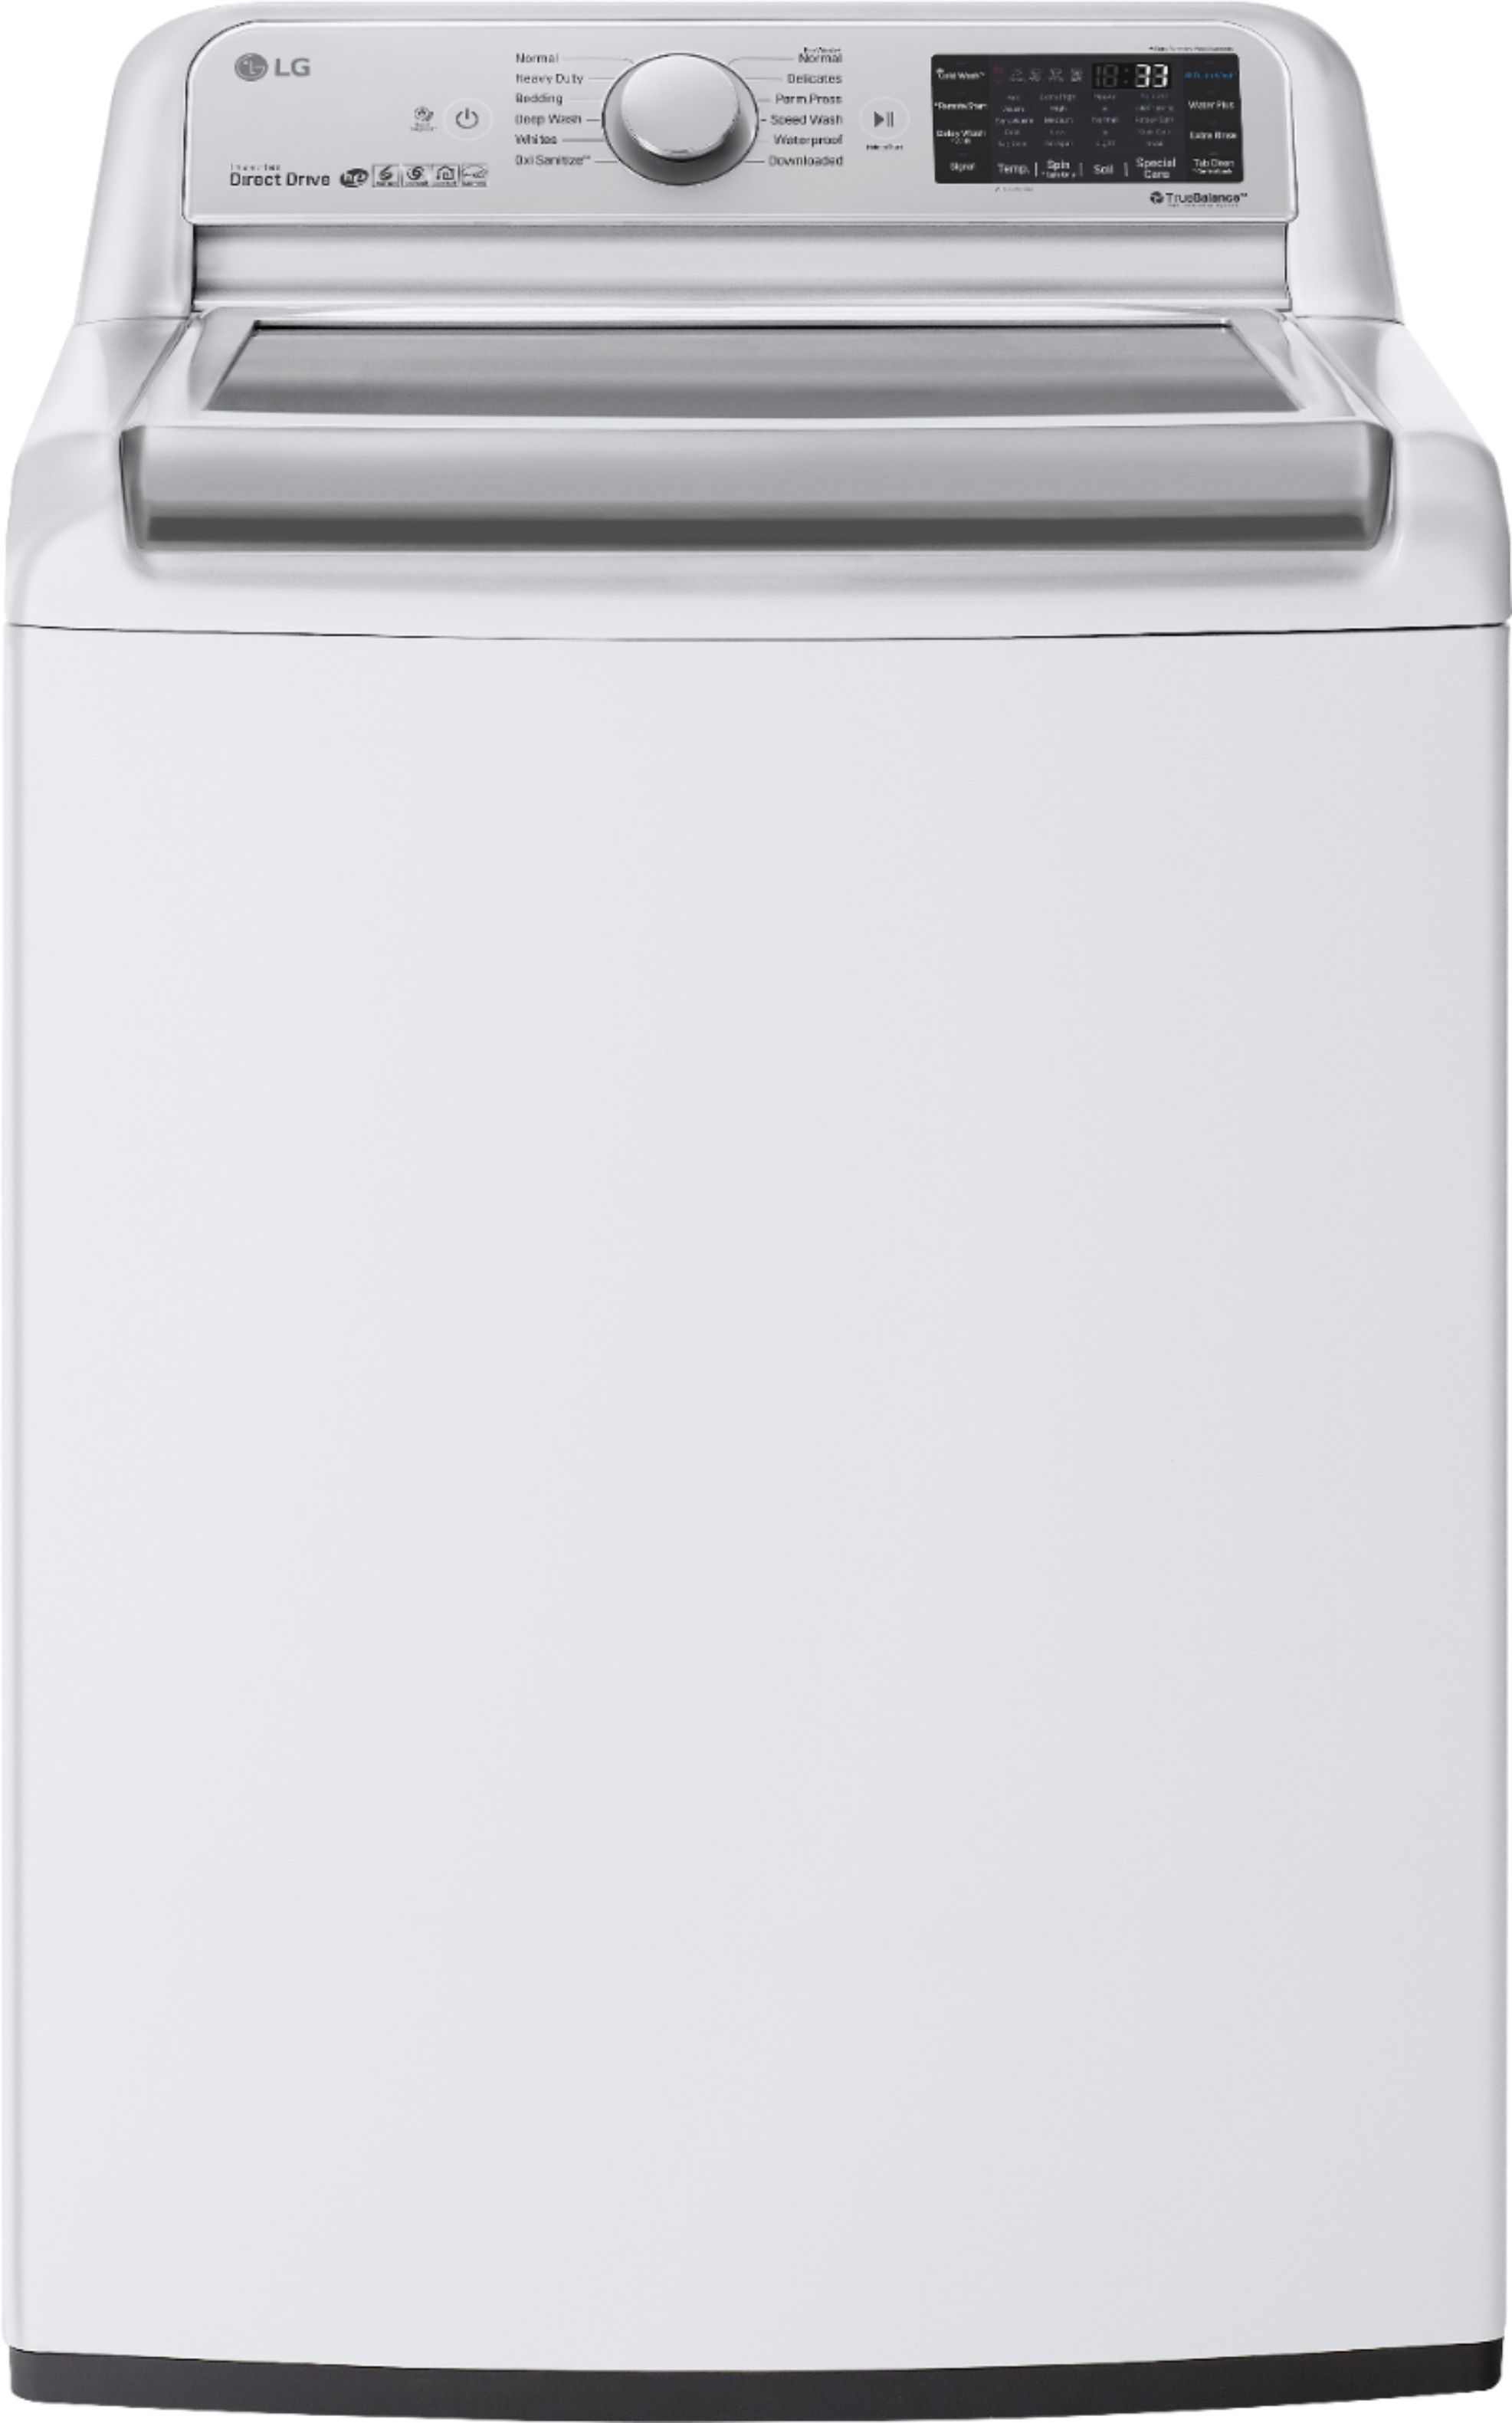 LG - 5.5 Cu. Ft. High-Efficiency Smart Top-Load Washer with TurboWash3D Technology - White